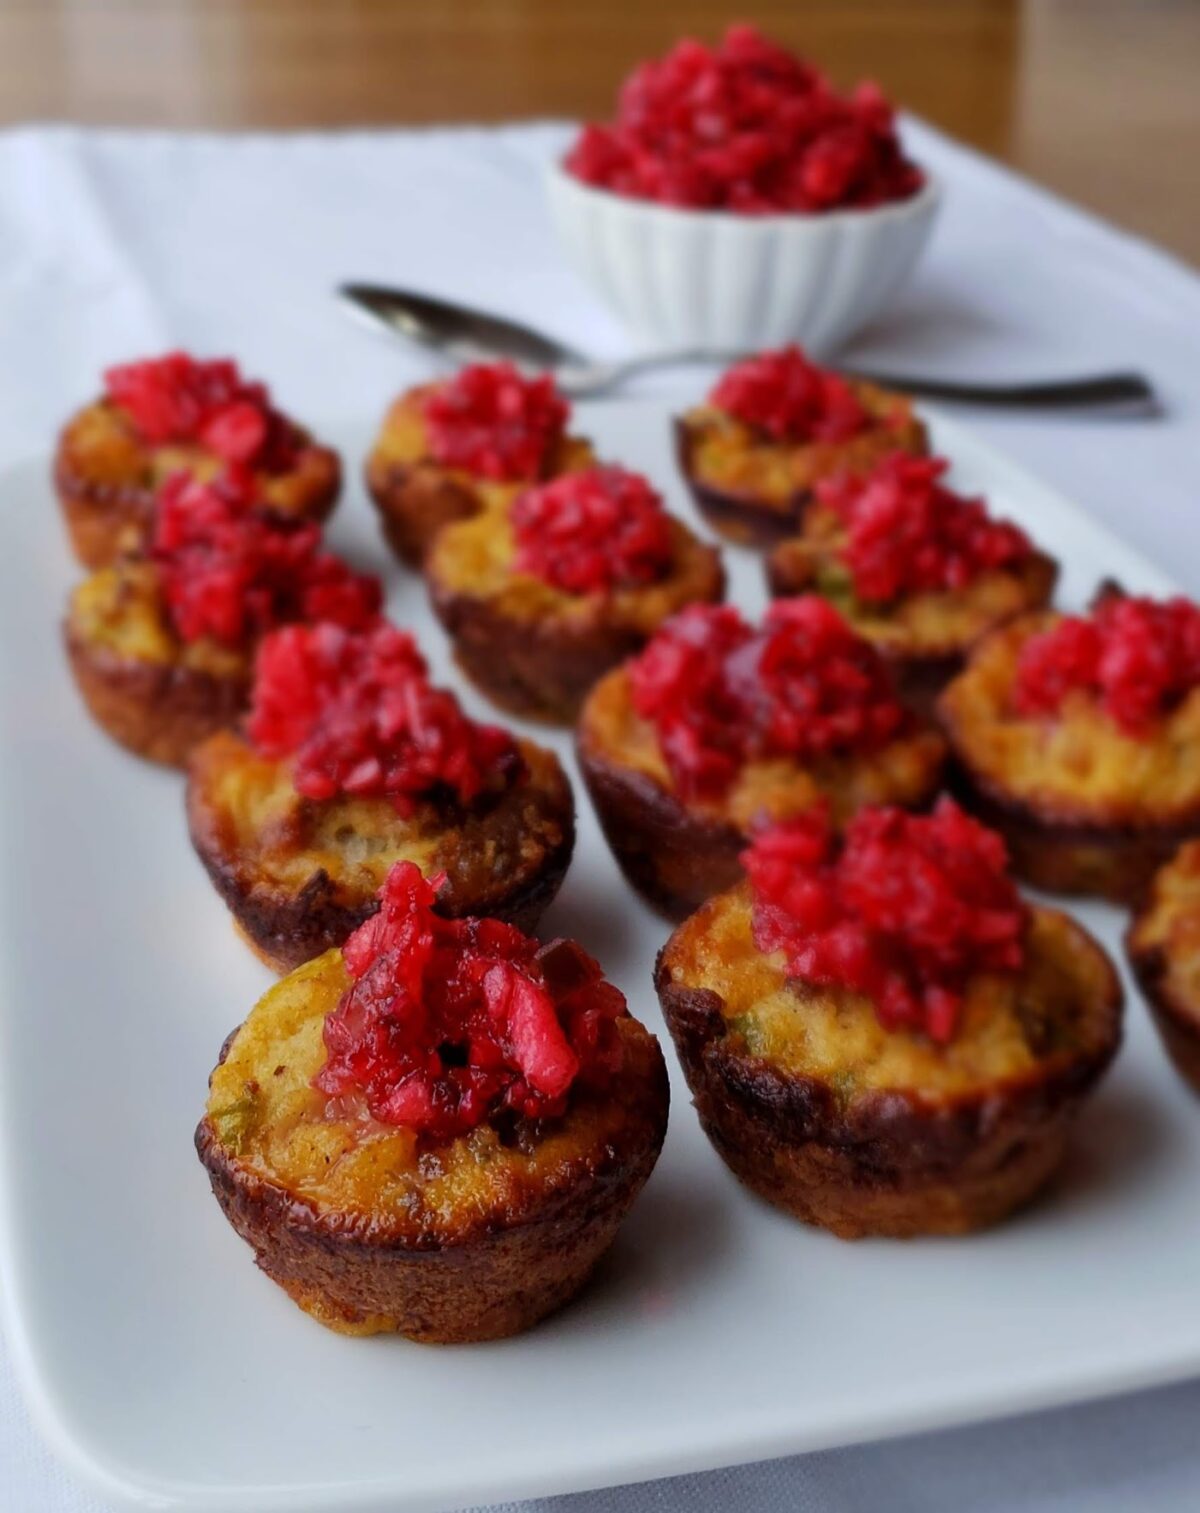 Cornbread dressing baked in mini muffin cups topped with Cranberry salsa